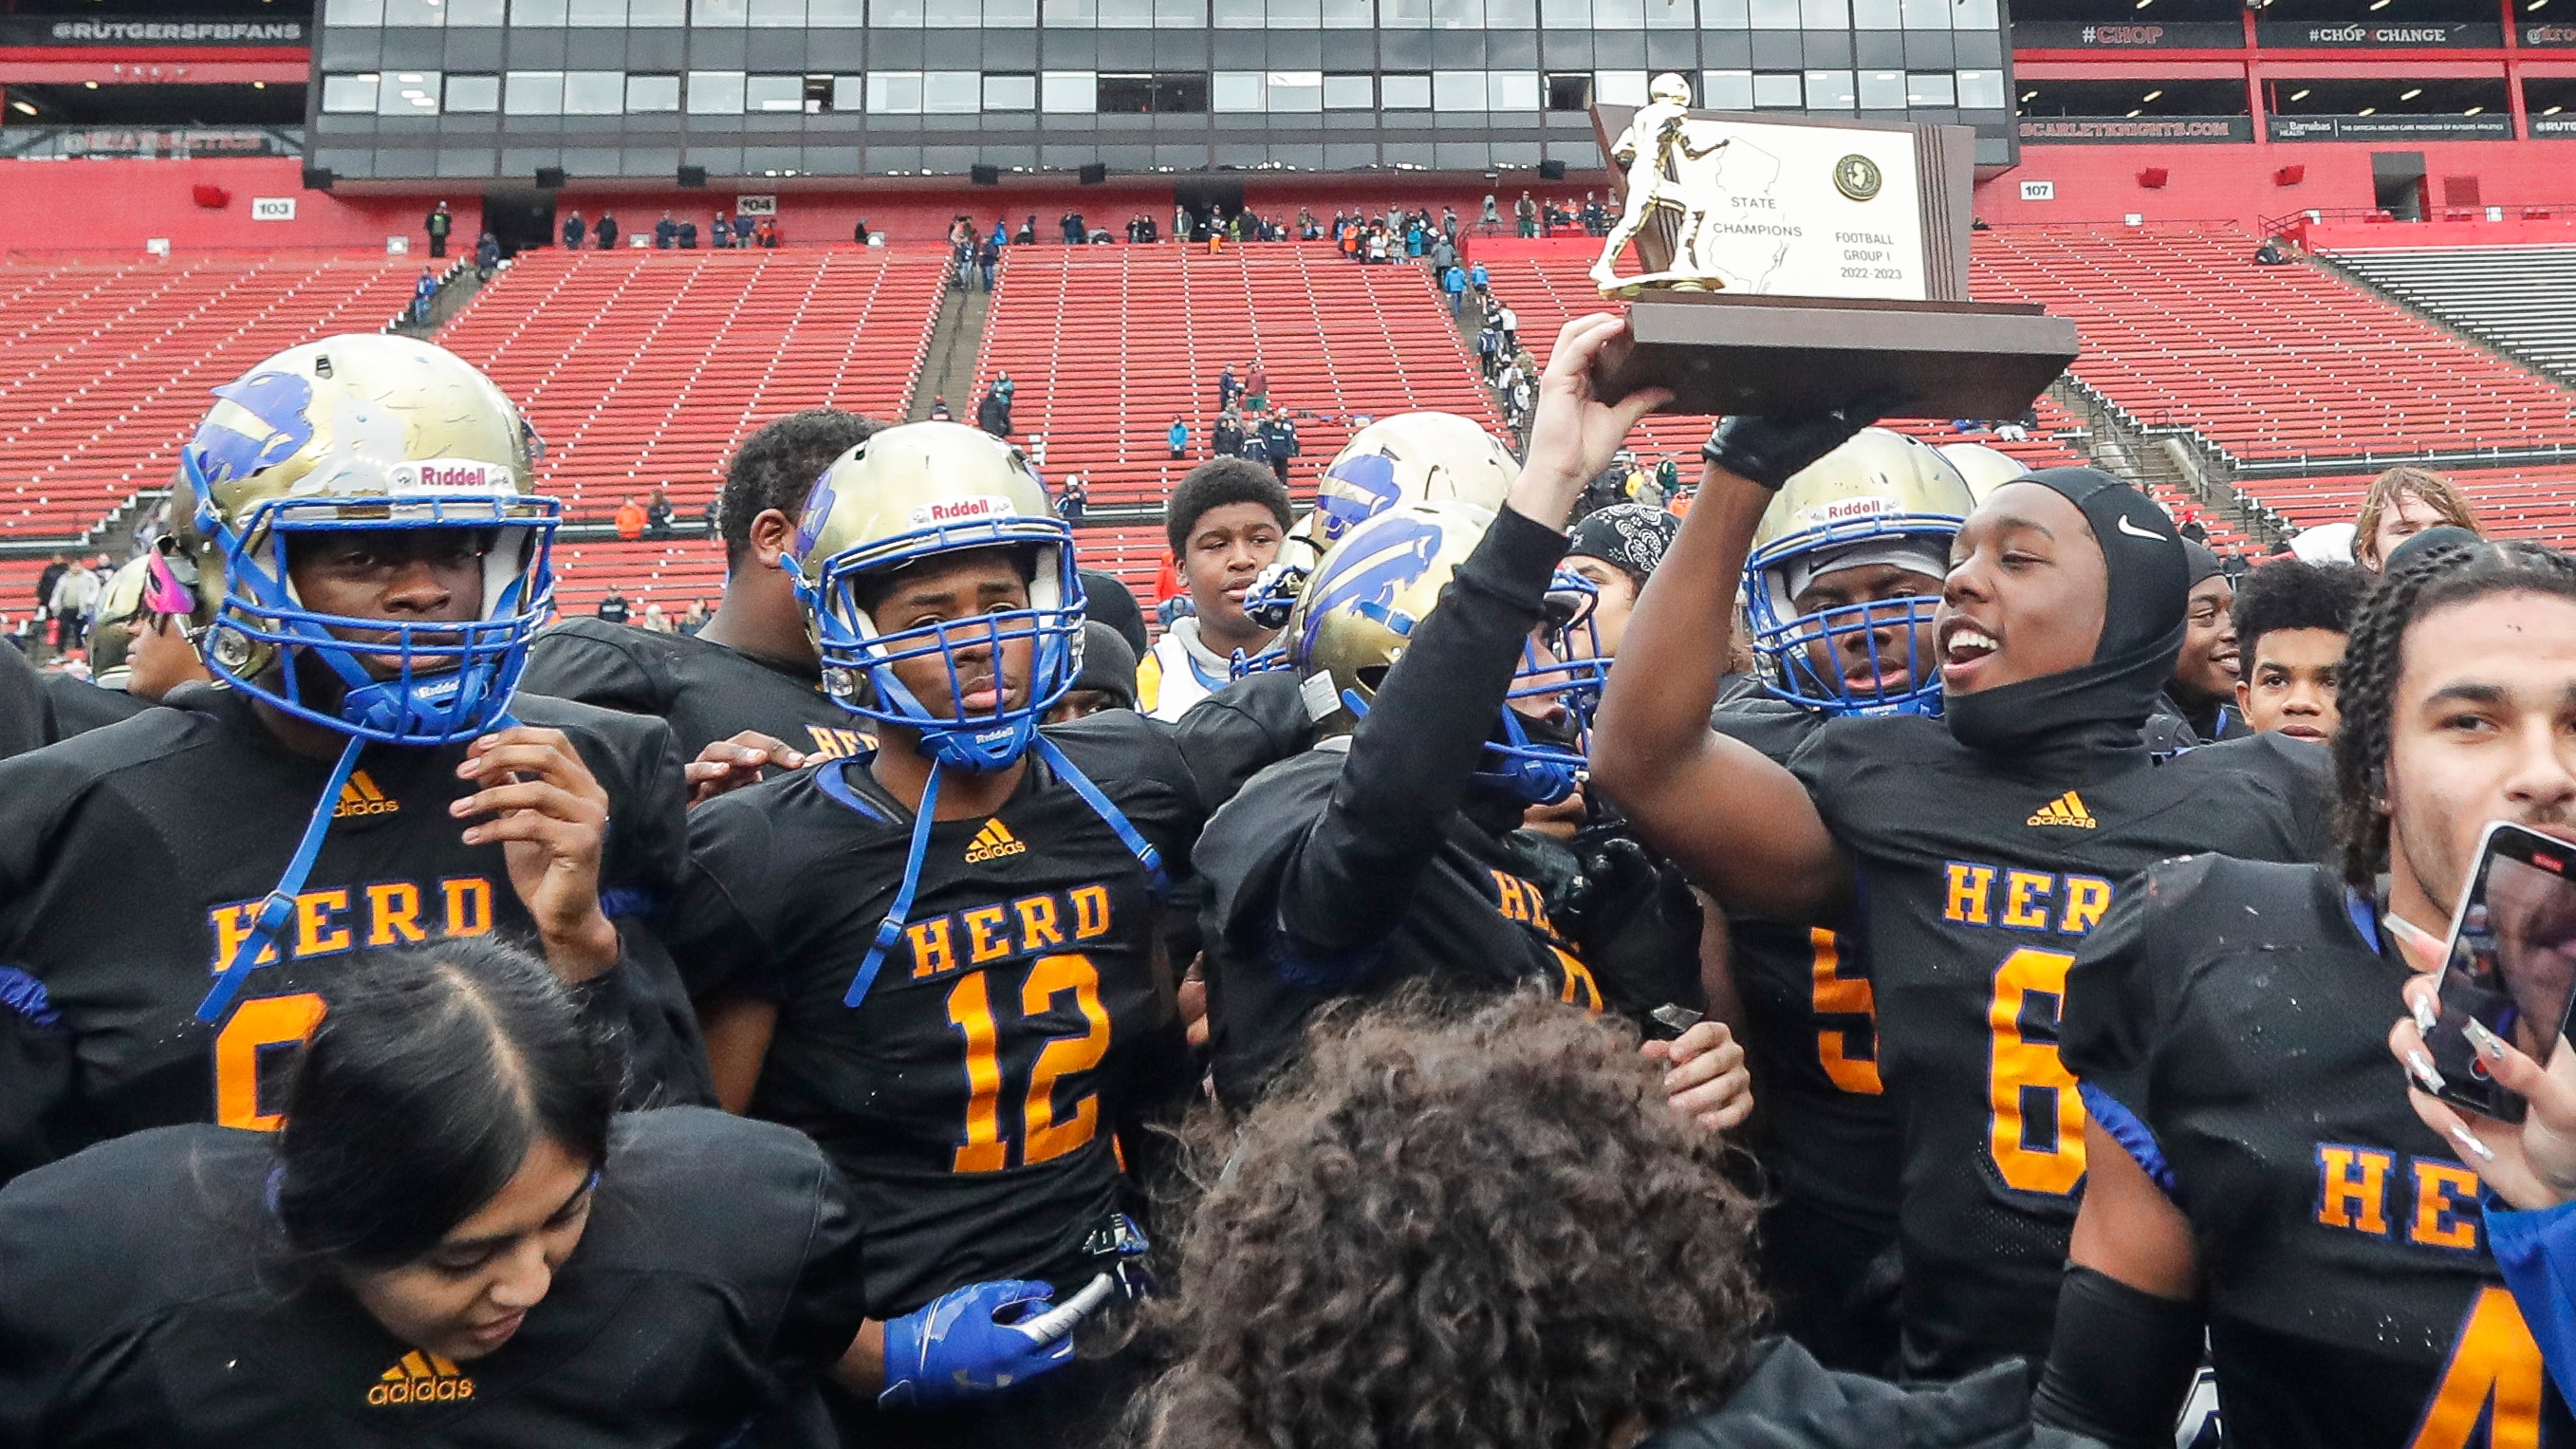 Woodbury wins first ever public high school football state title